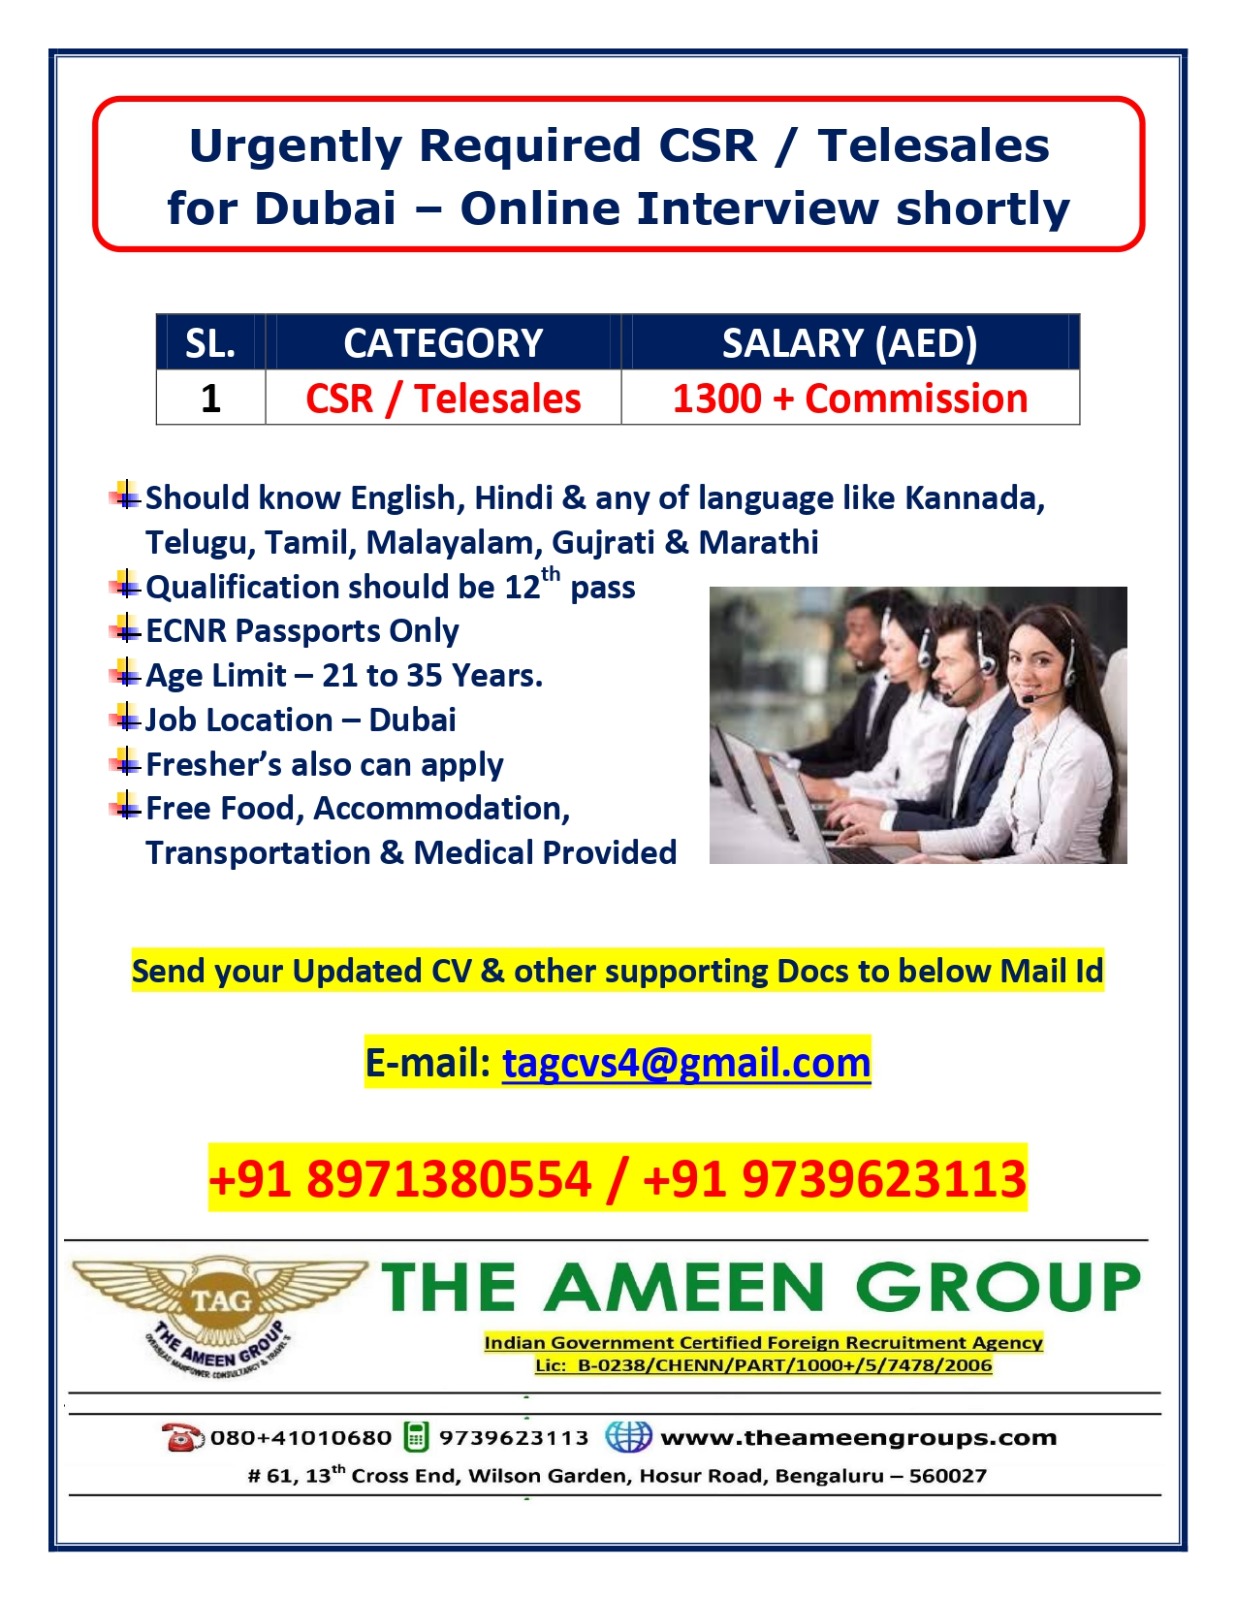 URGENTLY REQUIRED FOR DUBAI